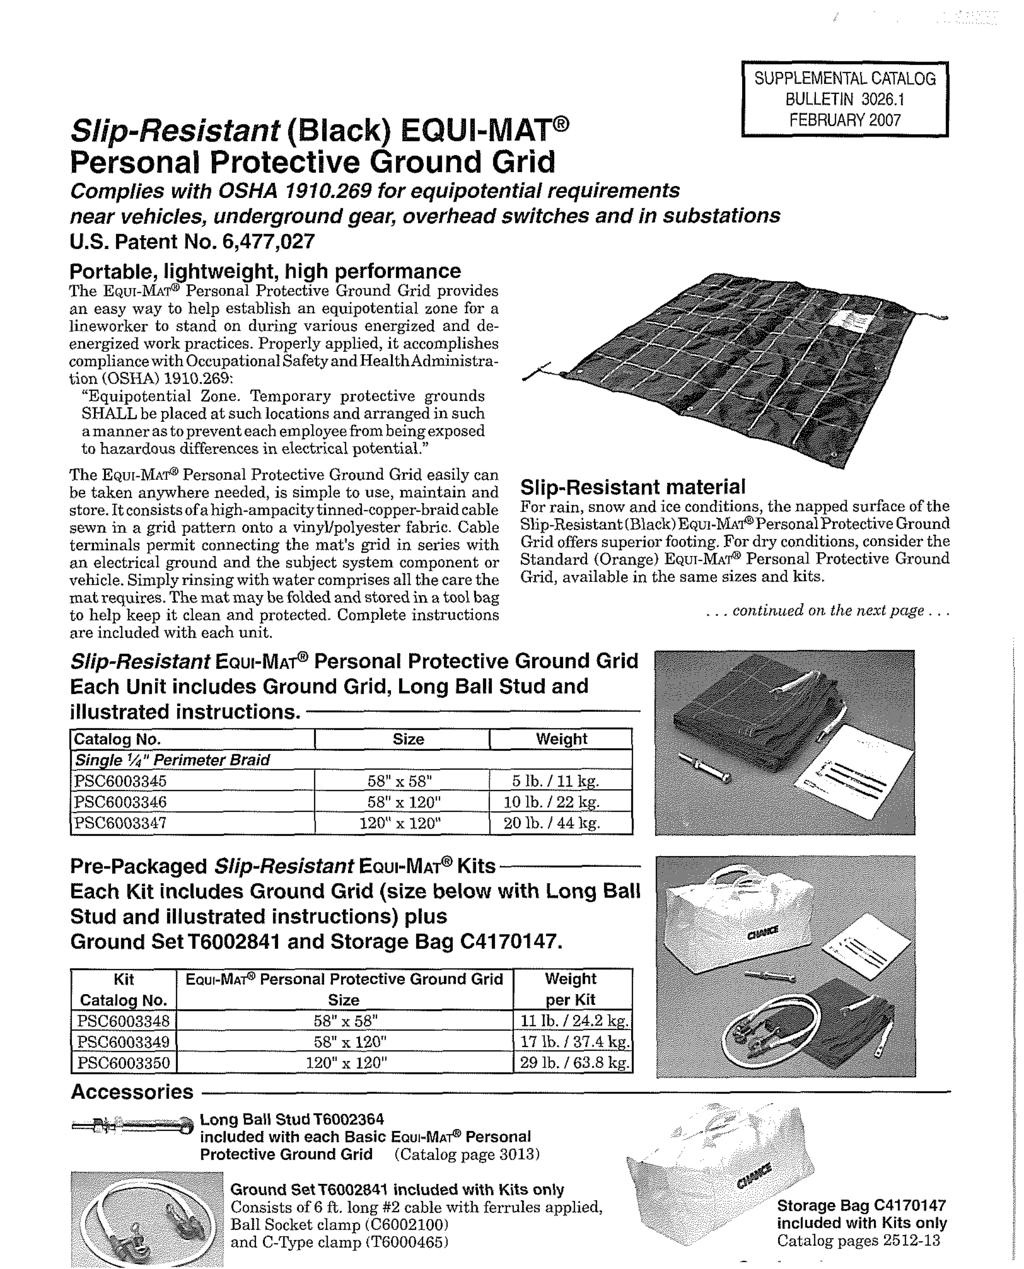 Slip-Resistant (Black) EQUI-MAT@ Personal Protective Ground Grid Complies with OSHA 1910.269 for equipotential requirements near vehicles, underground gear, overhead switches and in substations U.S. Patent No.